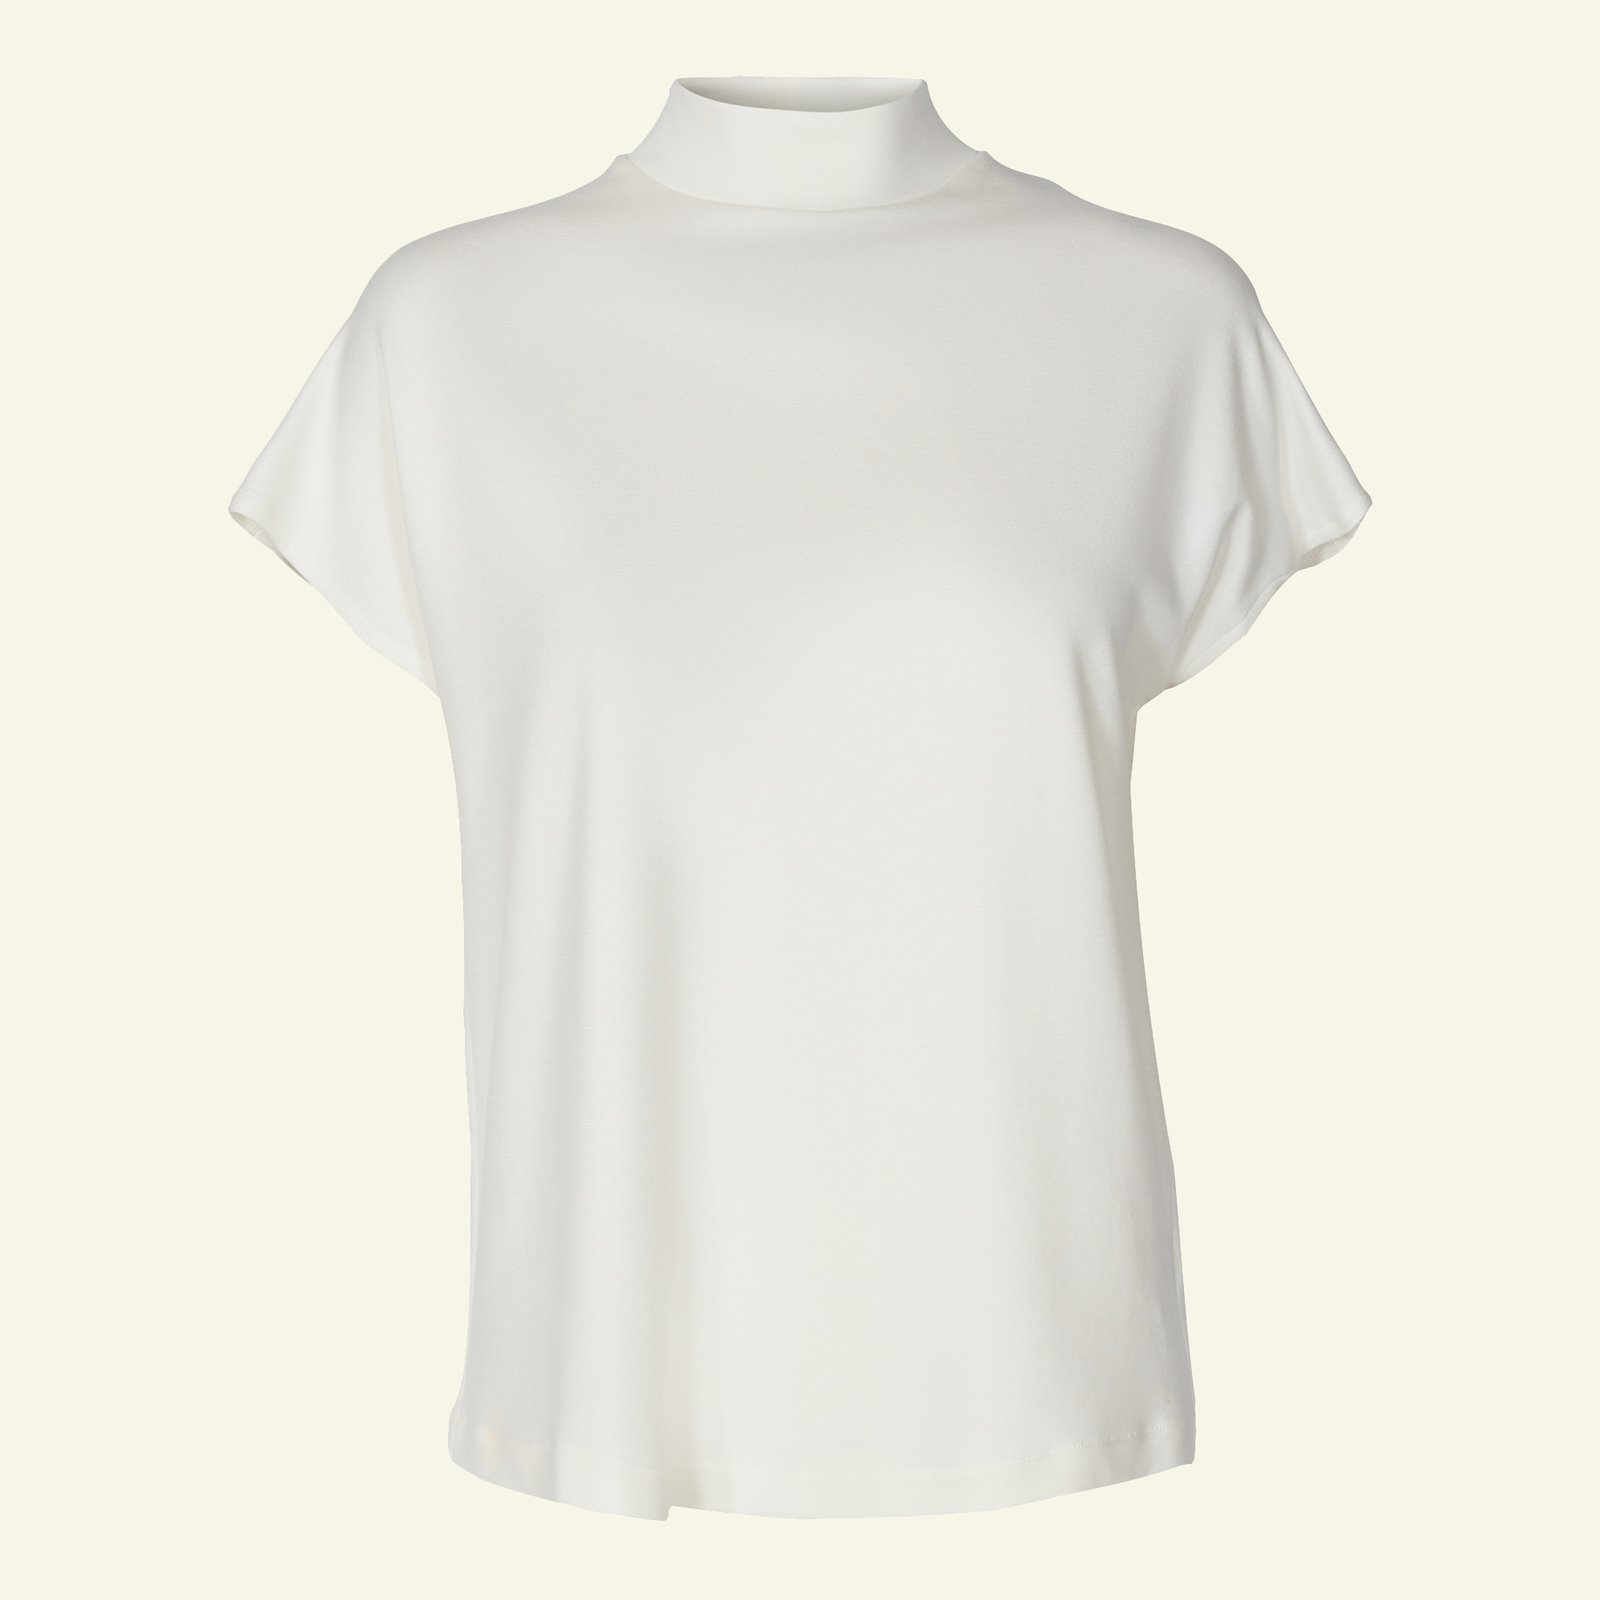 T-shirt and dress with high-neck, 40/12 p22069_270412_sskit